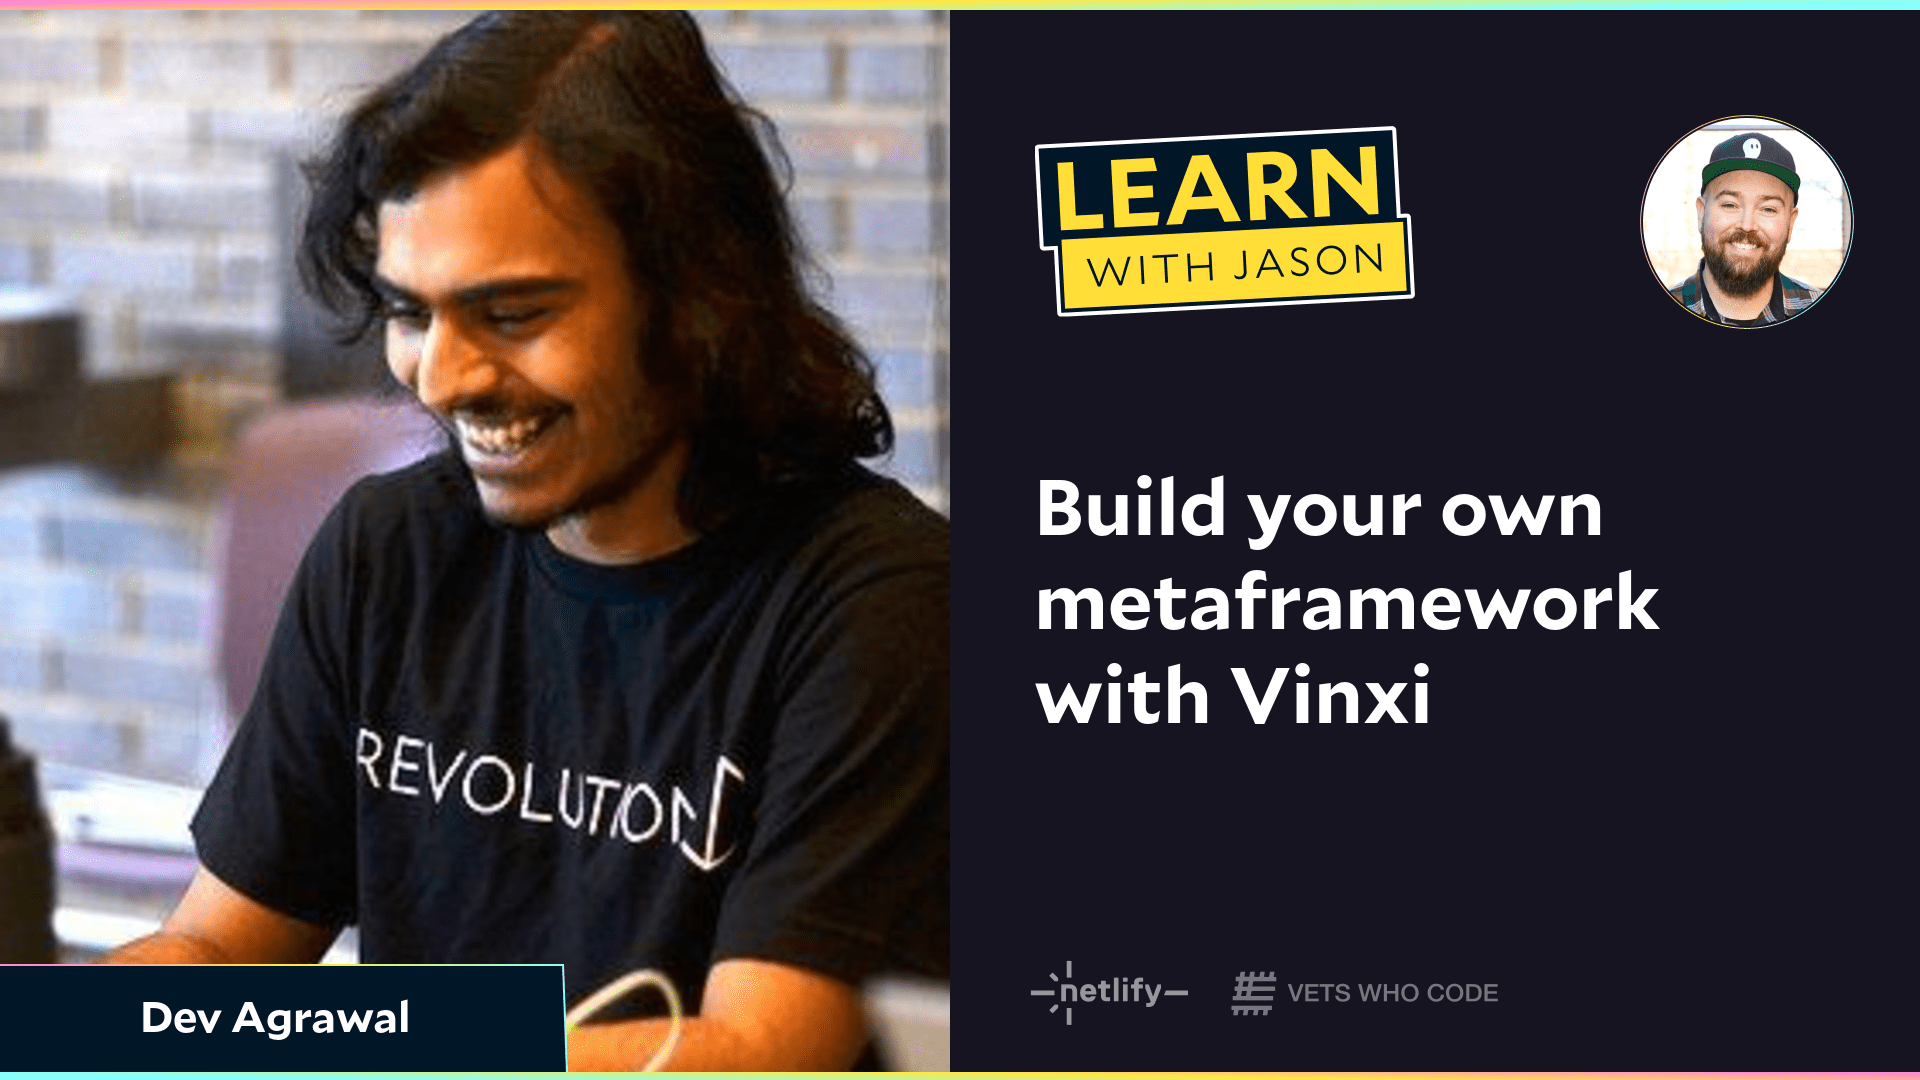 Build your own metaframework with Vinxi (with Dev Agrawal)